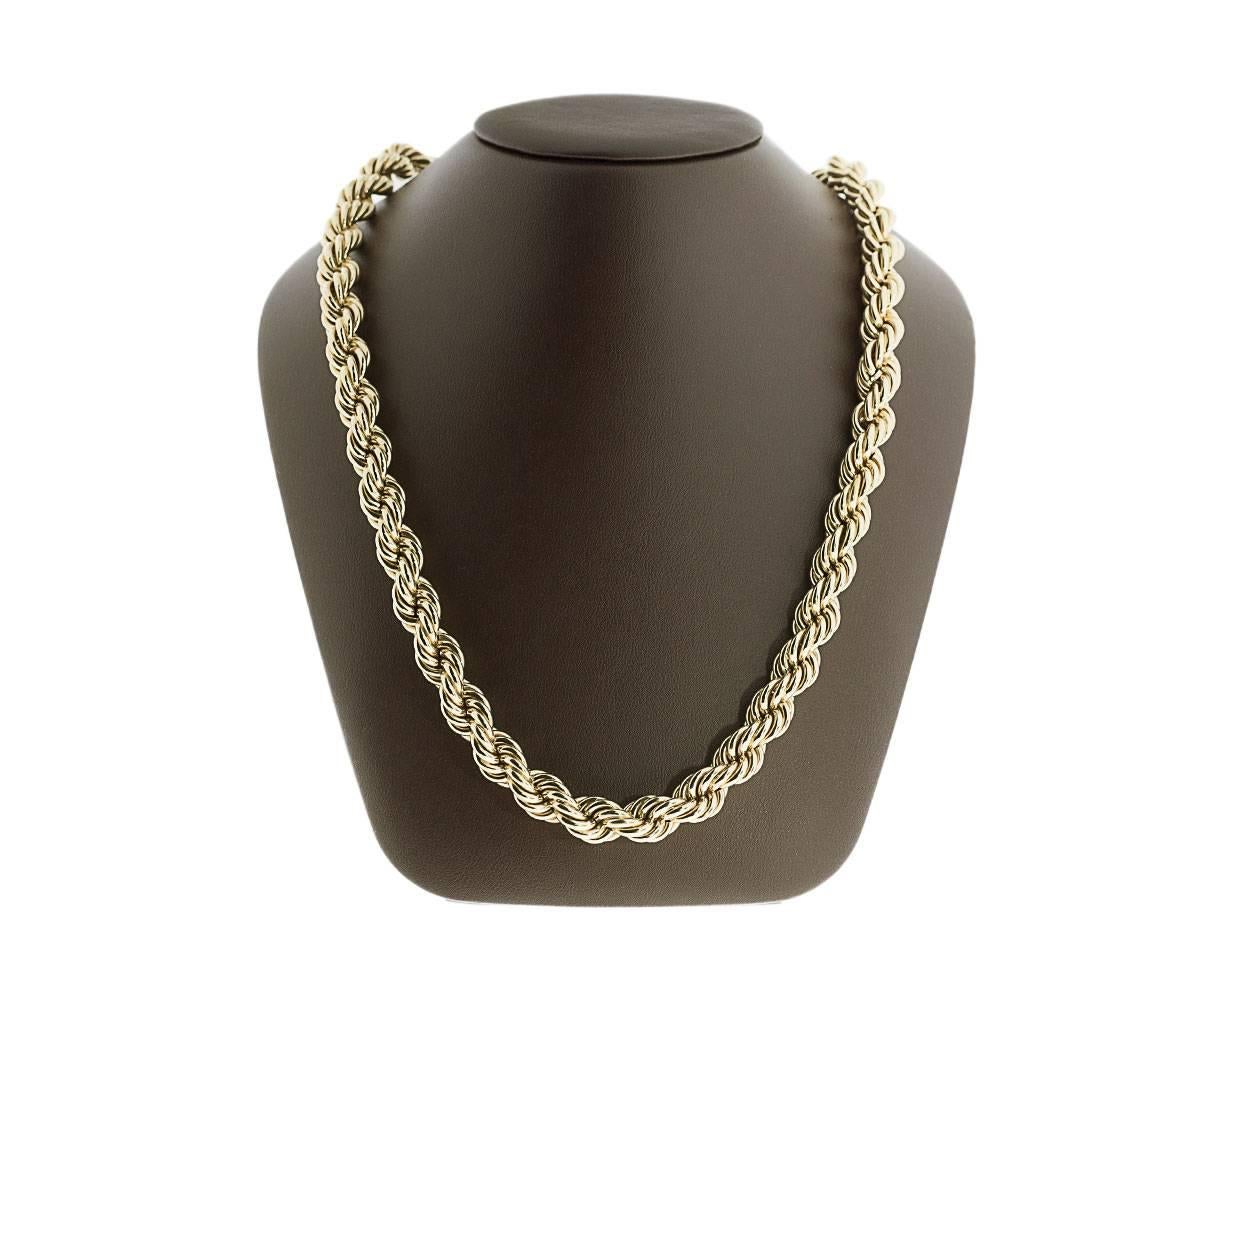 This lovely necklace offers a classy & timeless look. This necklace is made of solid 14 karat yellow gold and features a braided design. It measures 28